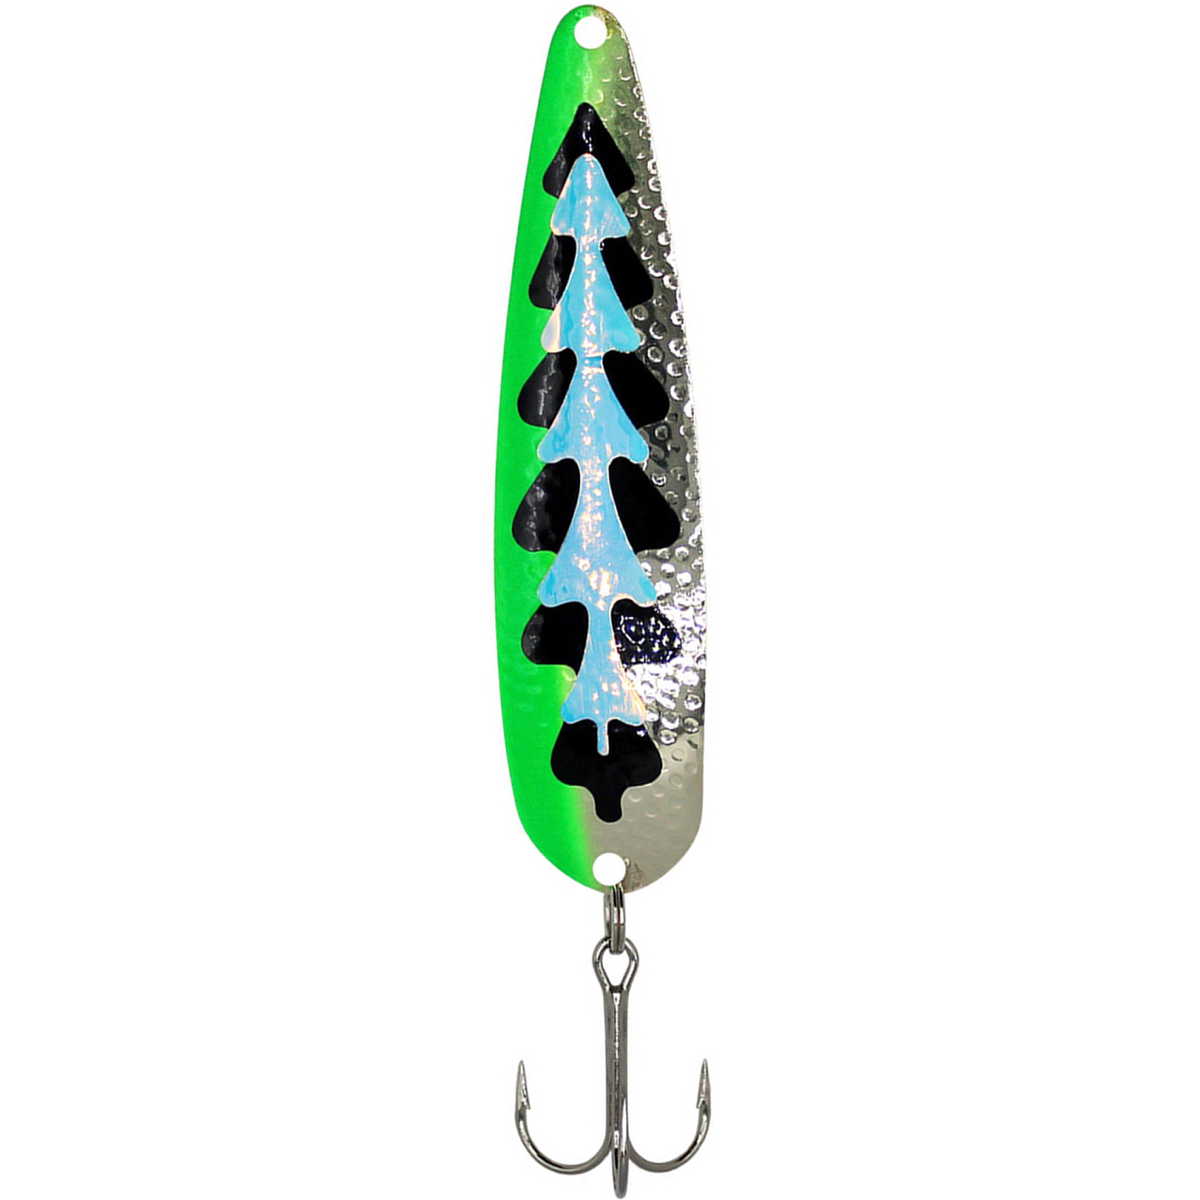 Photo of Advance Tackle Michigan Stinger Magnum Spoon for sale at United Tackle Shops.